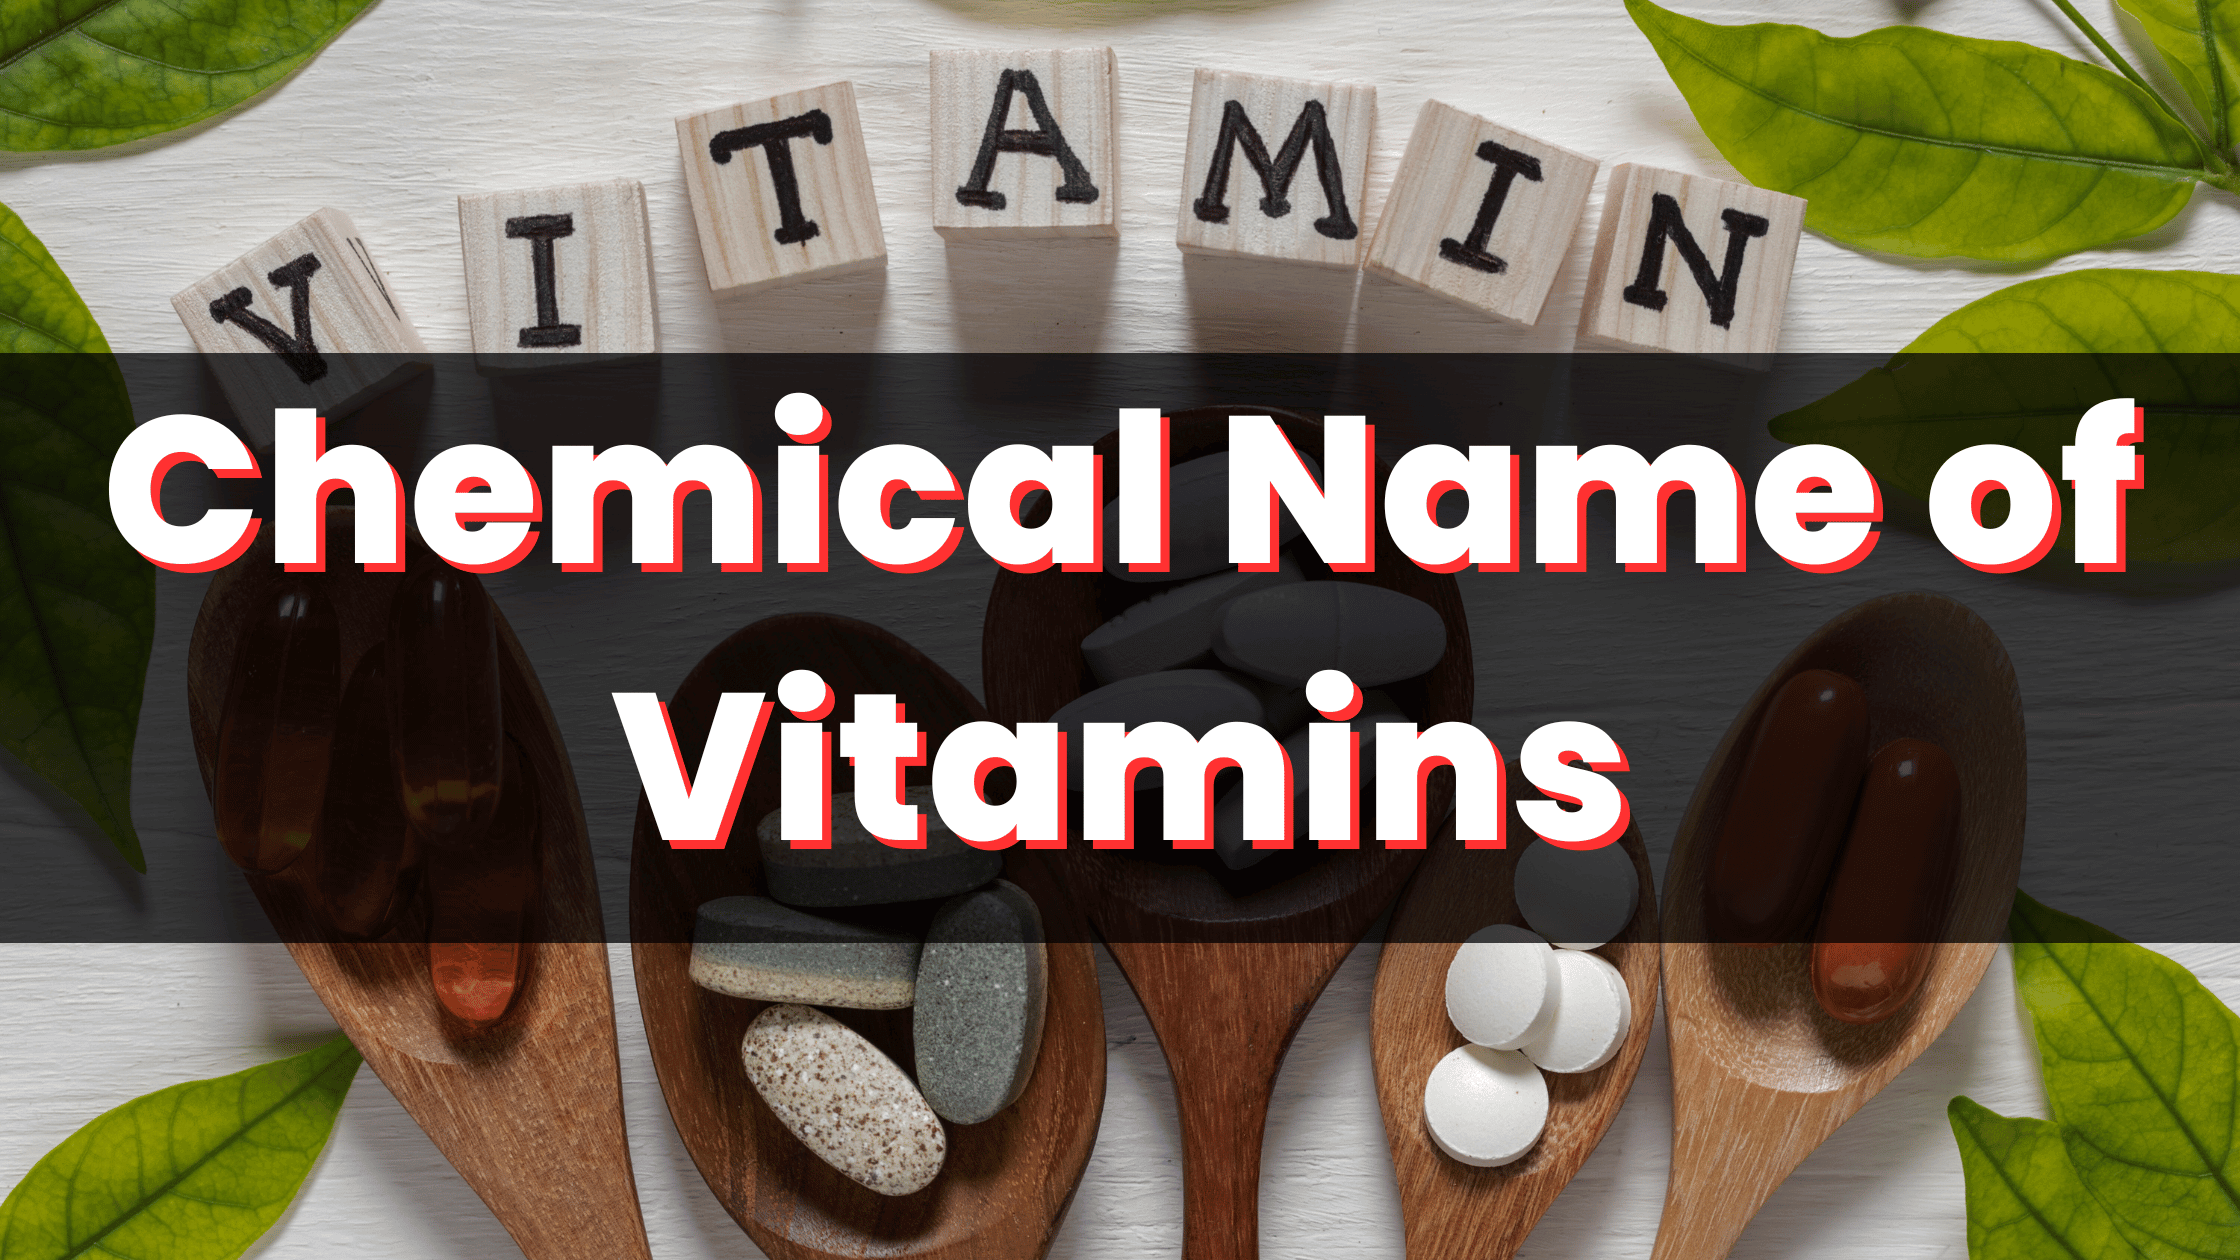 Vitamins and their Scientific name